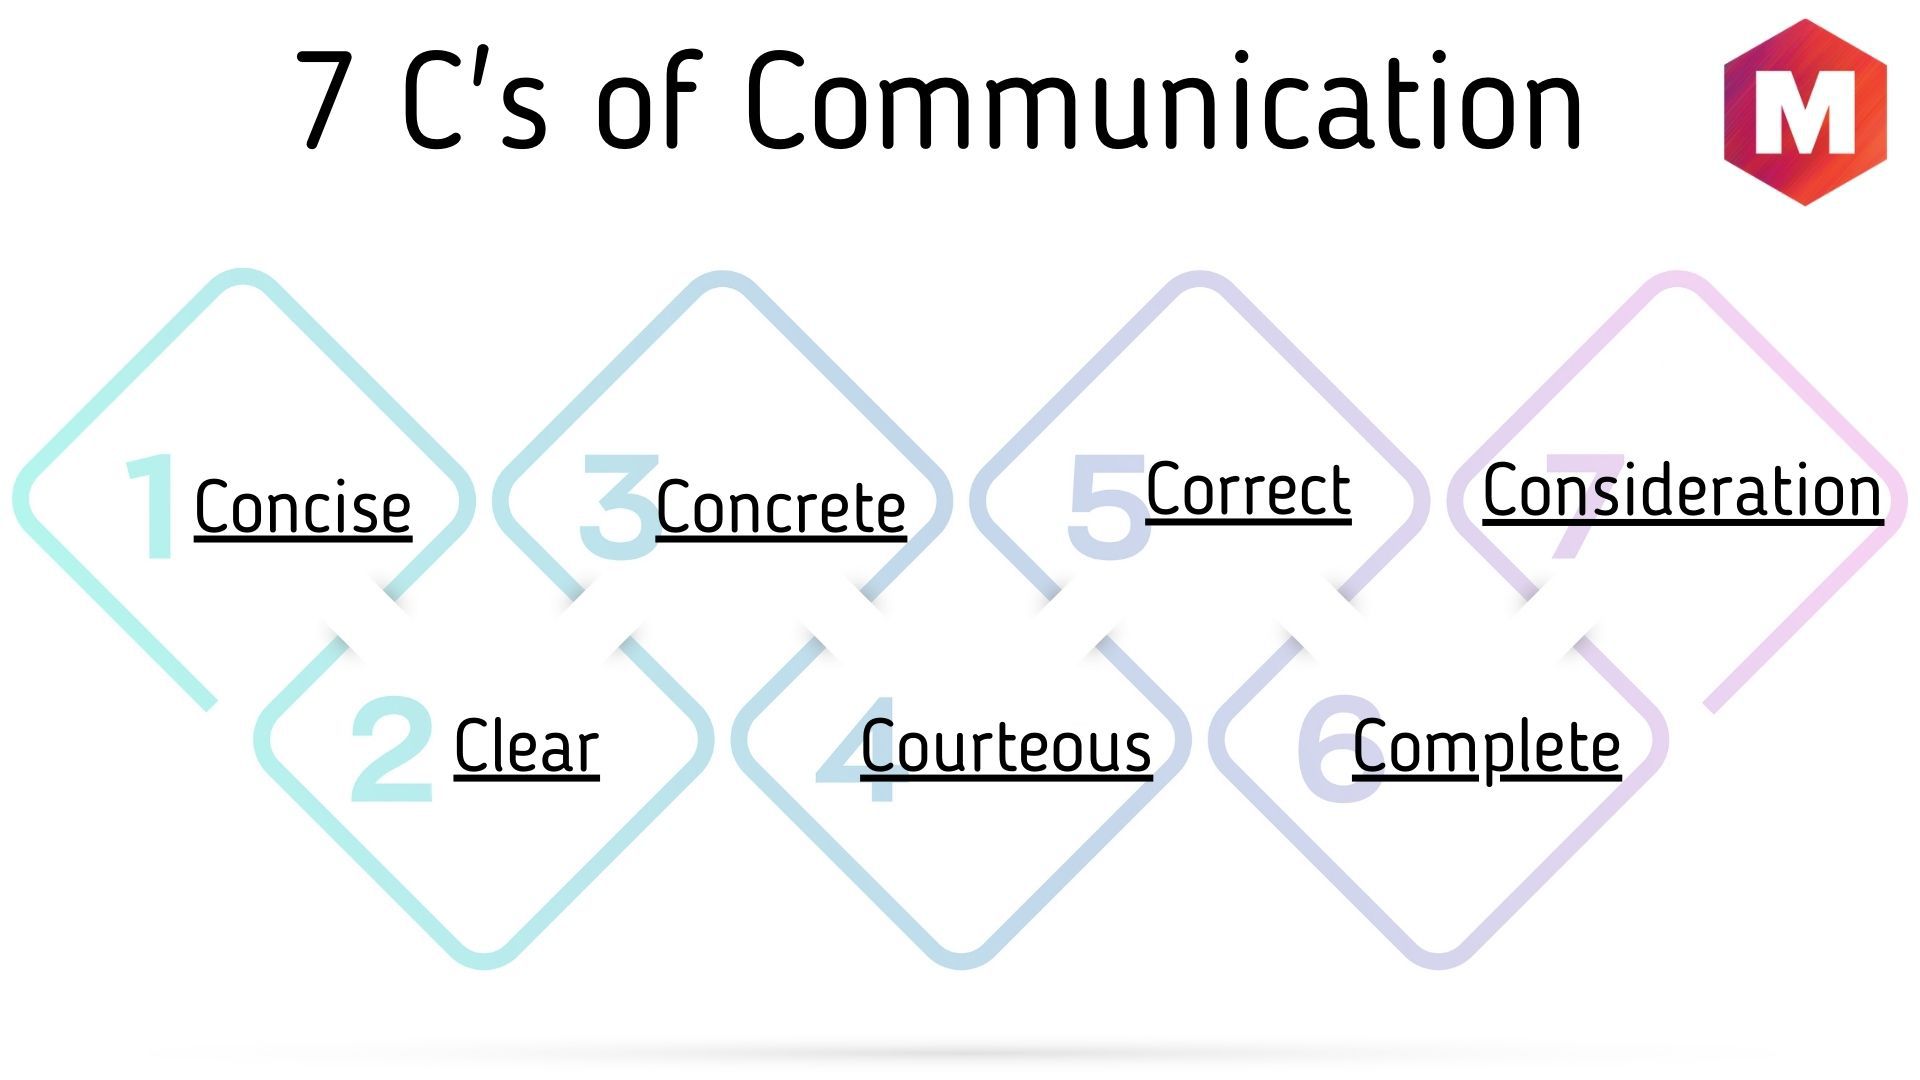 What Are The 7 Cs Of Communication